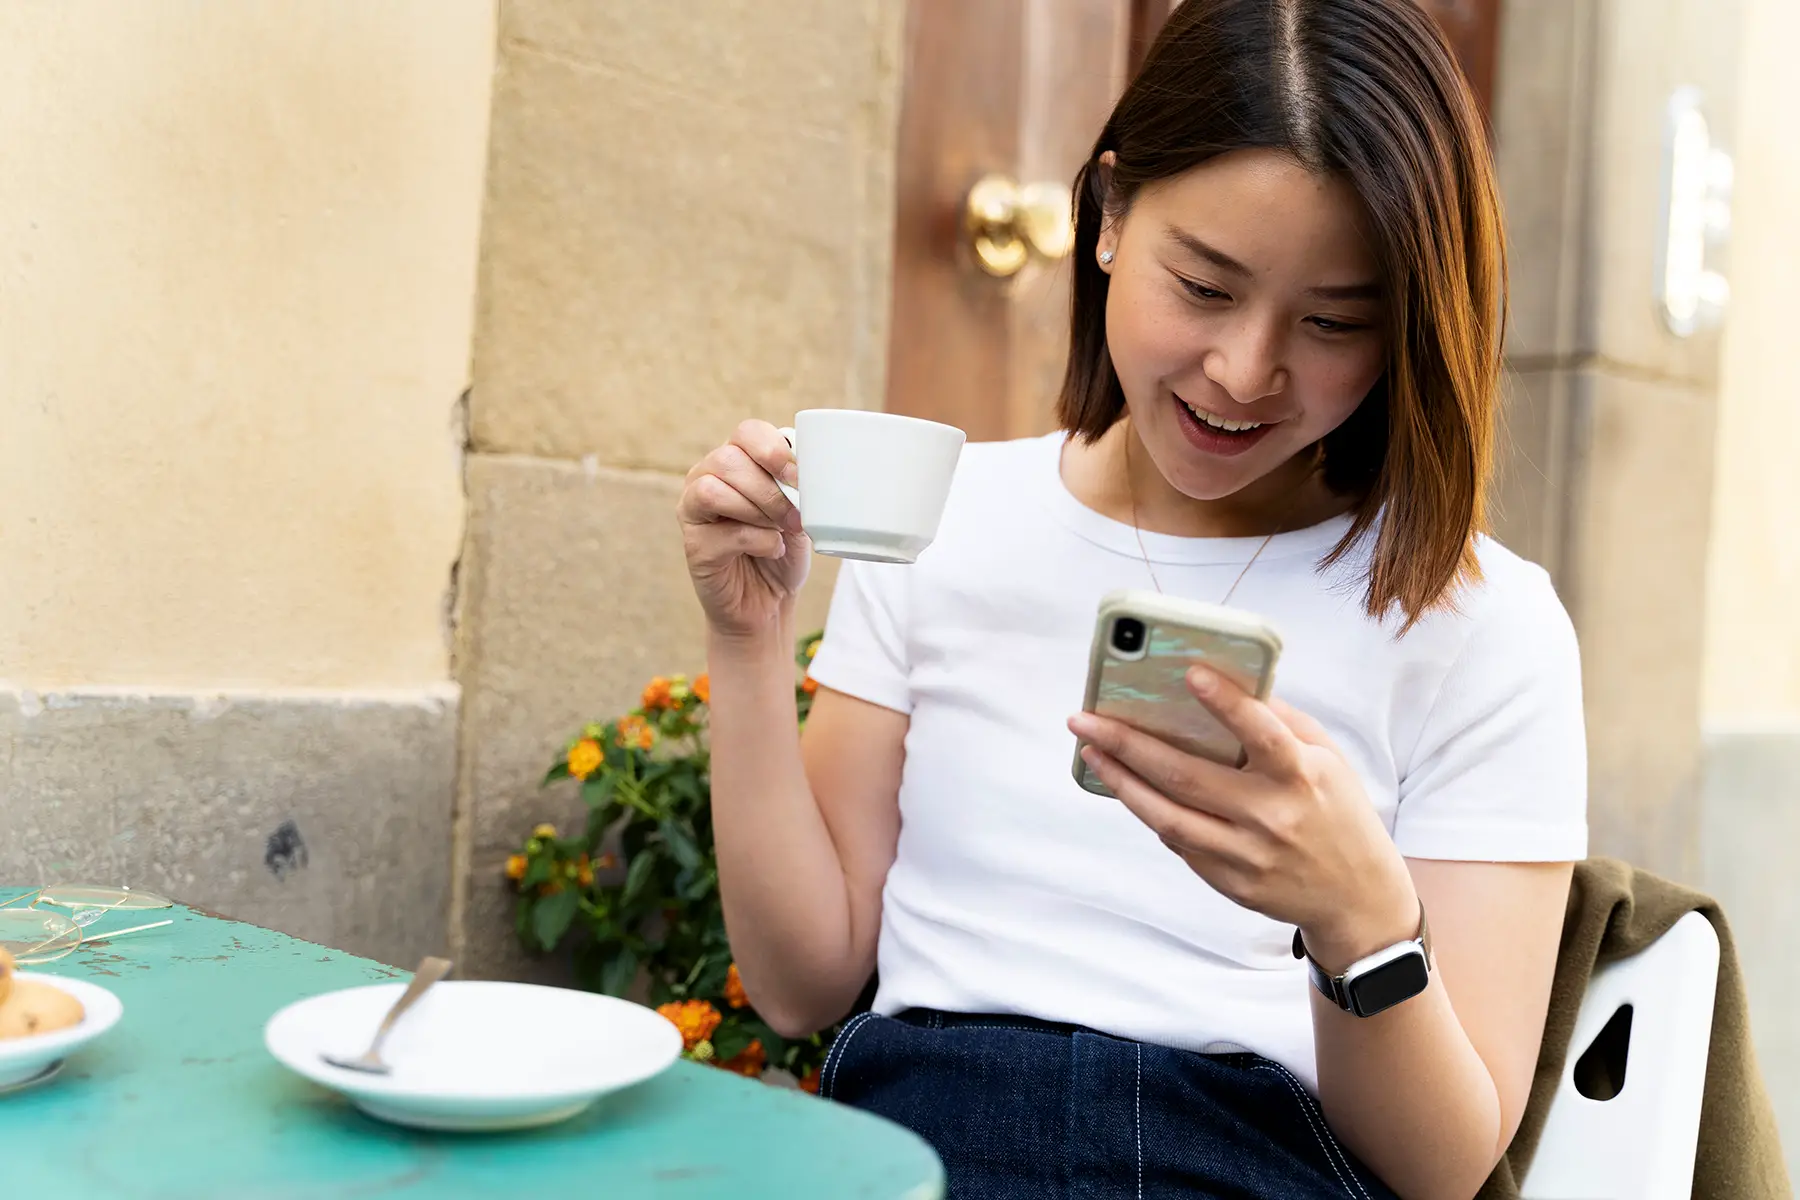 A woman looking down at her phone and smiling as she hold a cup of coffee